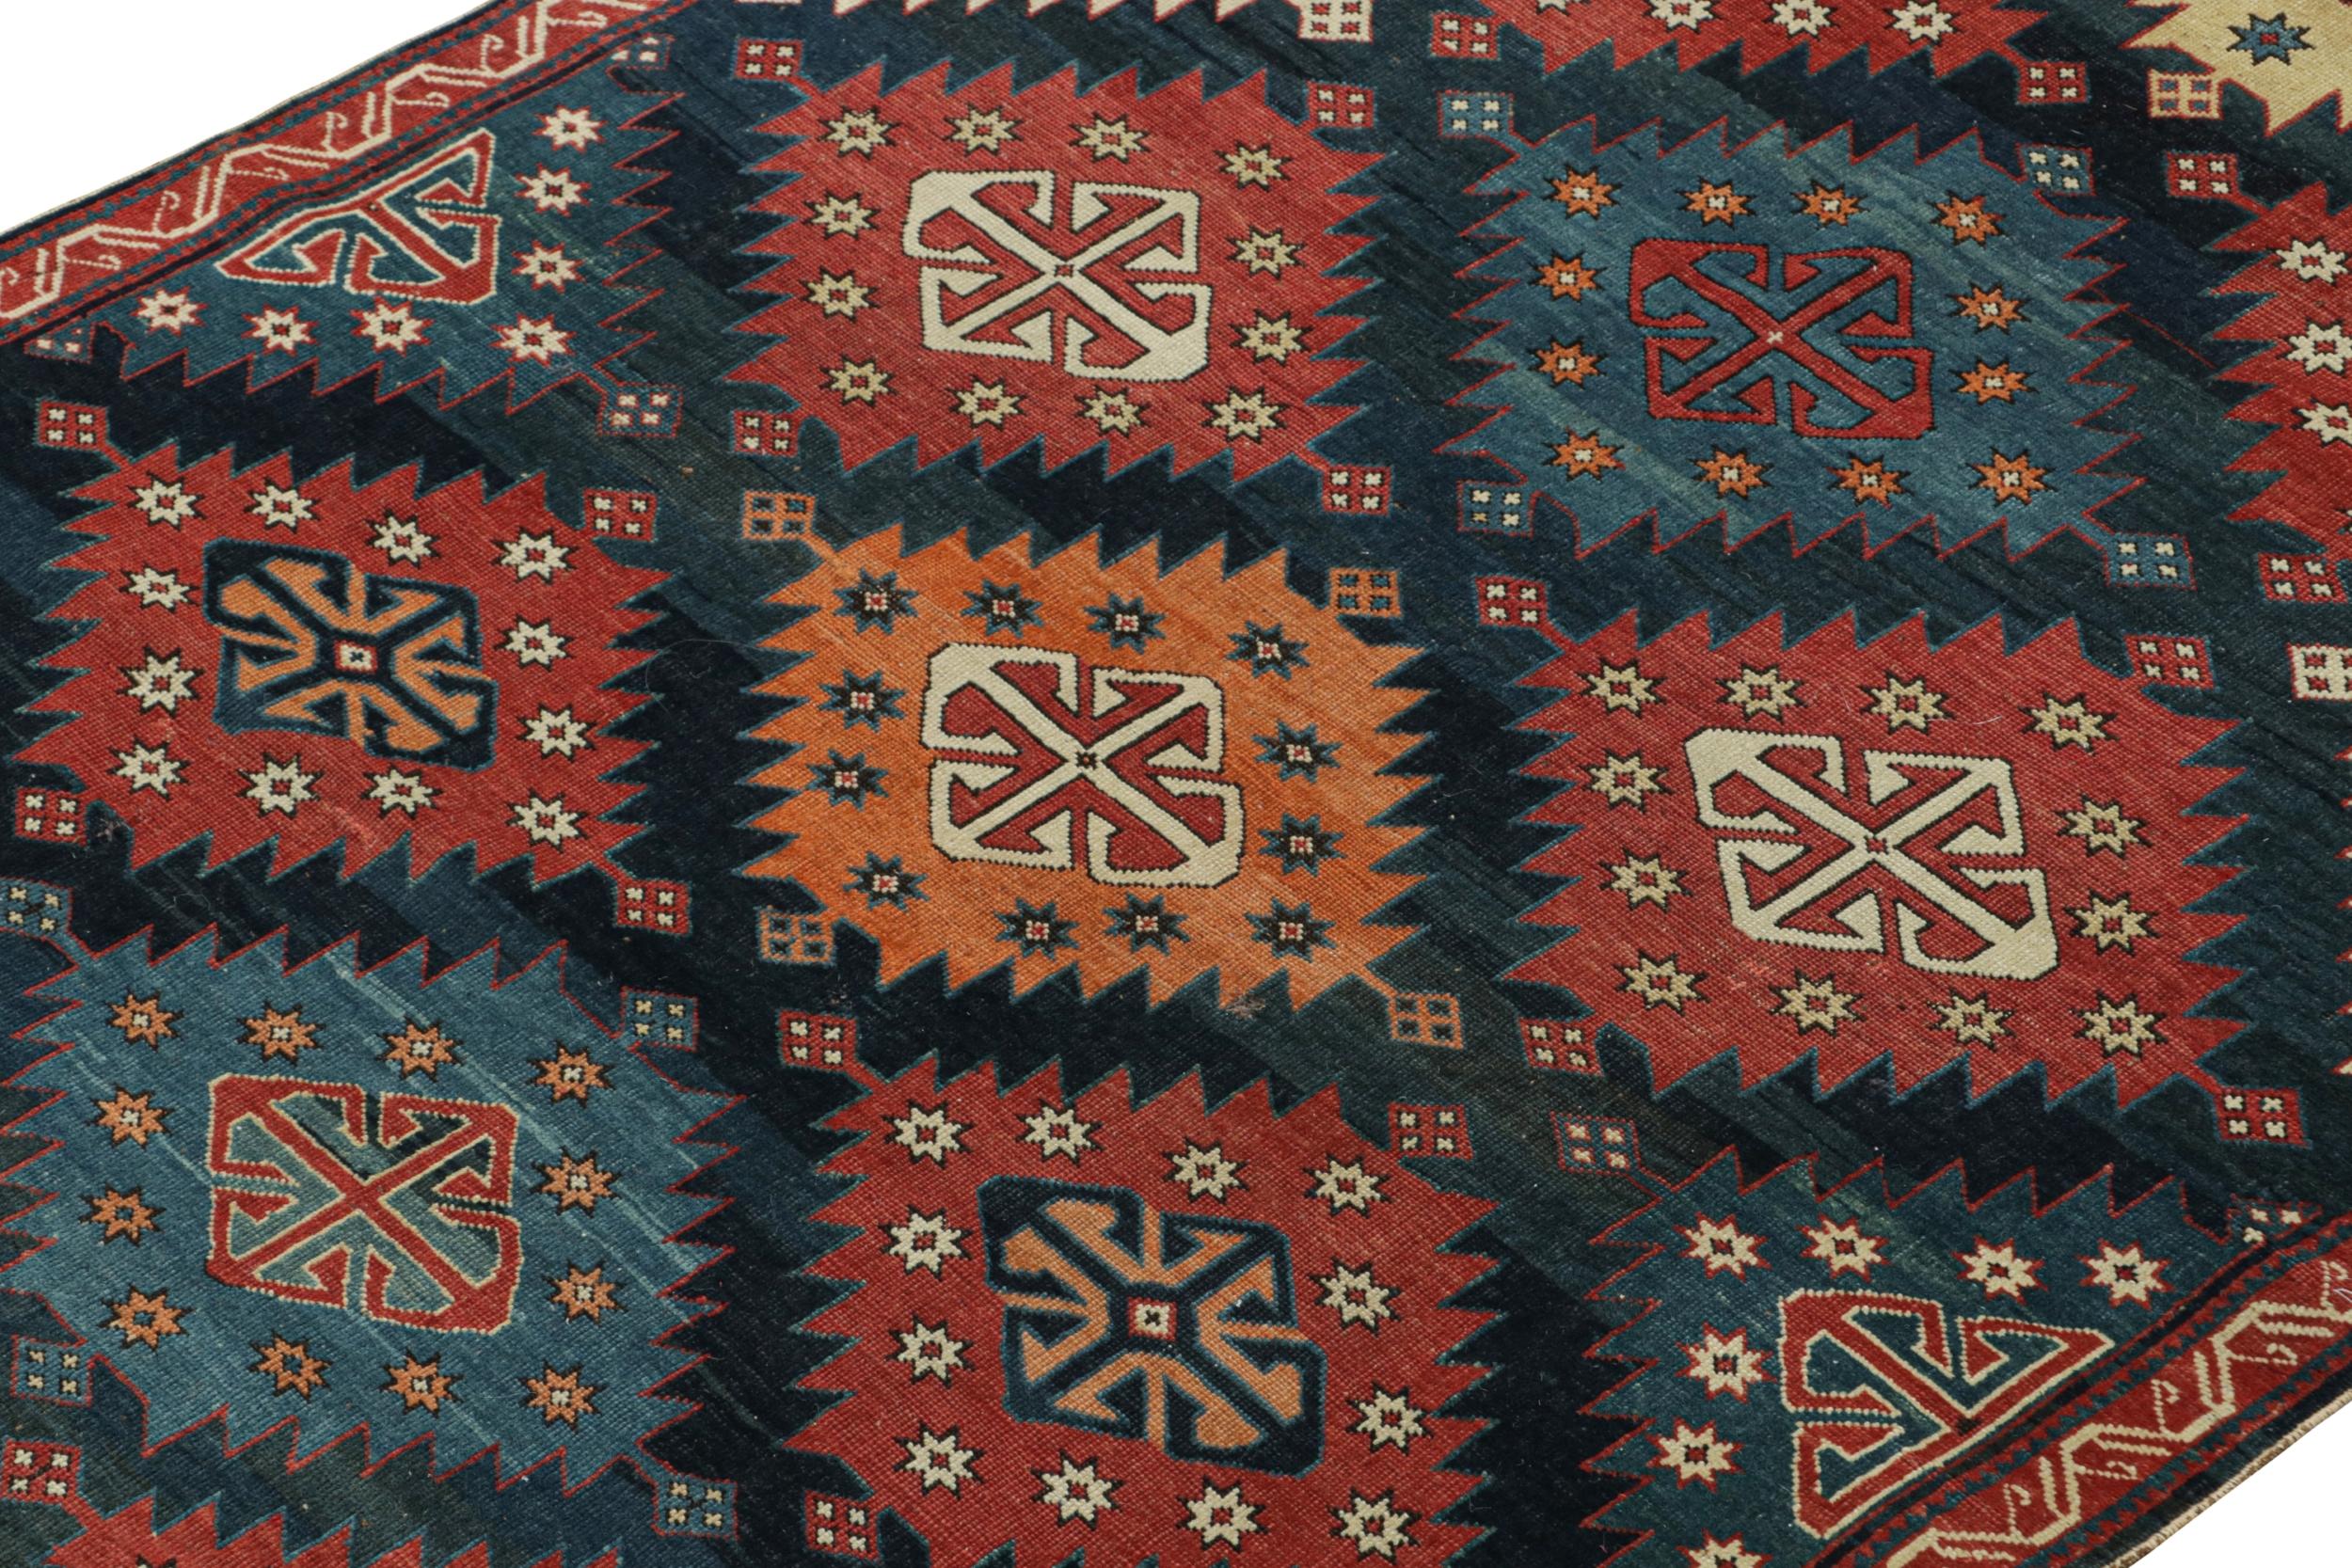 This antique 4x5 Caucasian rug is believed to be a rare Kazak piece—hand-knotted in wool circa 1910-1920. 

On the Design: 

Connoisseurs may note that Kazak rugs like this piece are widely considered some of most sought-after Caucasian tribal rugs.